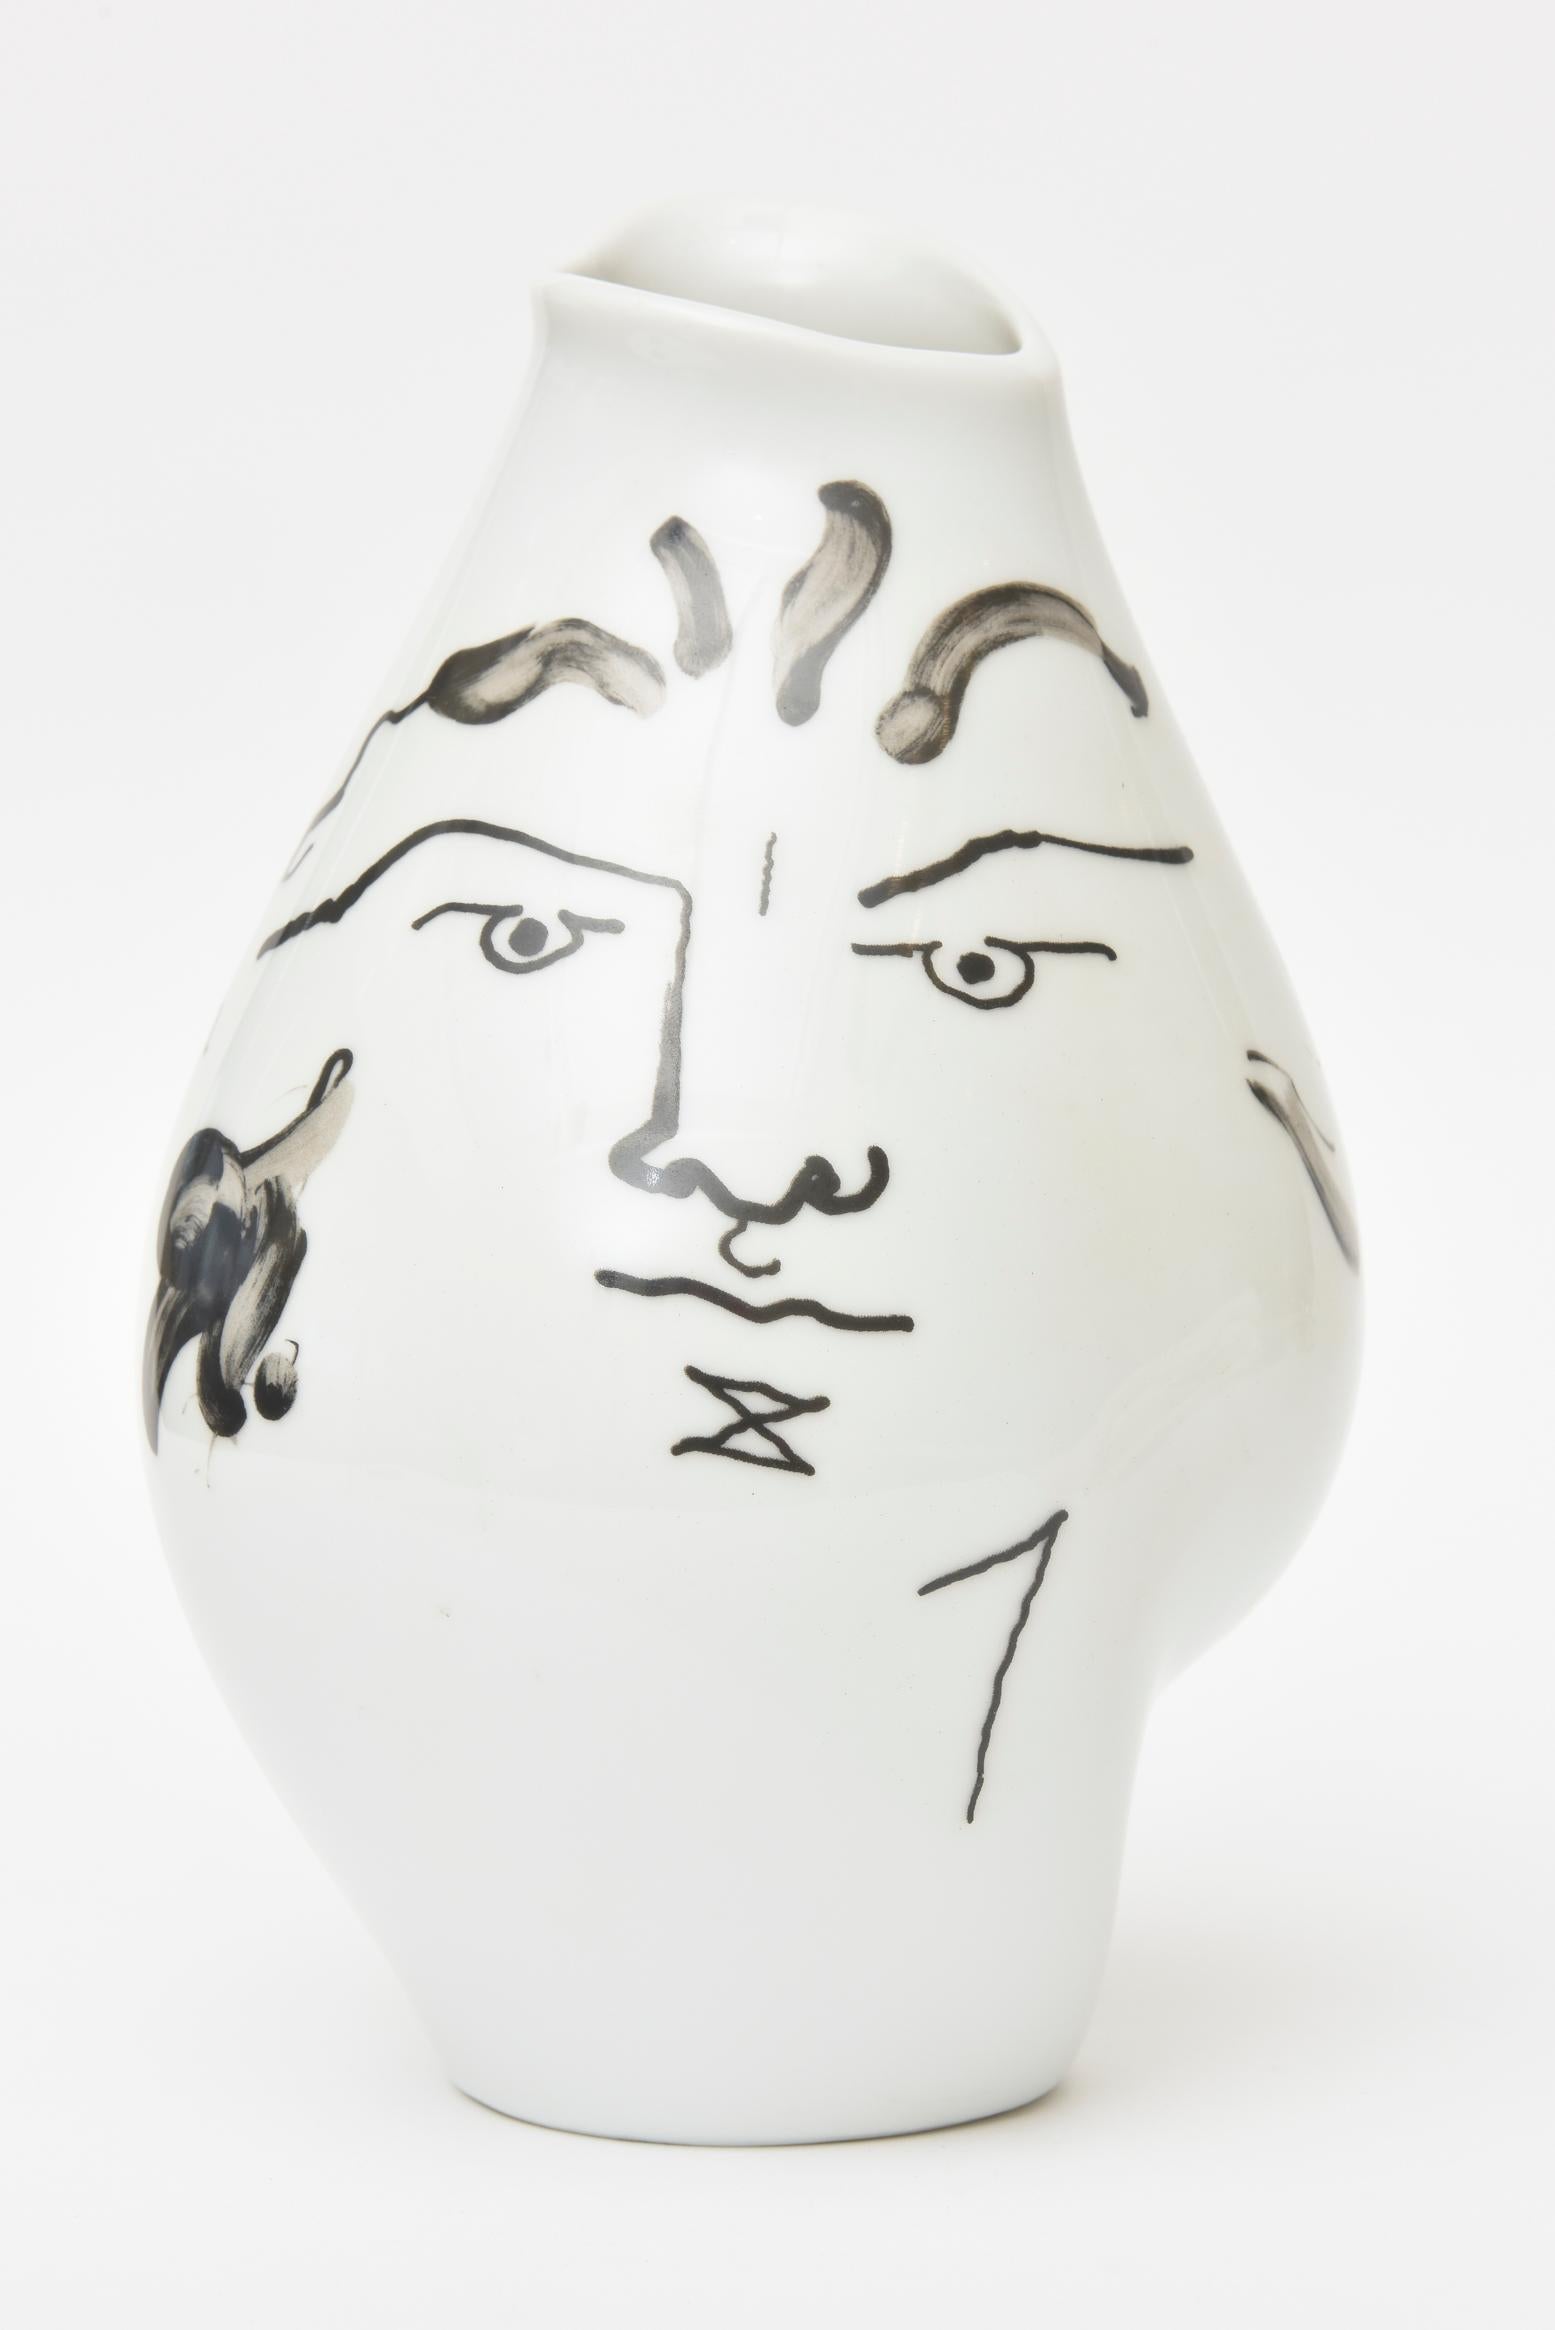 This wonderful glazed porcelain tetes face vase originally designed in 1952 by Jean Cocteau and was produced in the early 1970s by the Classic Rose Rosenthal Group, Germany. The freeform design of abstract facial motifs and ovoid irregular shape of